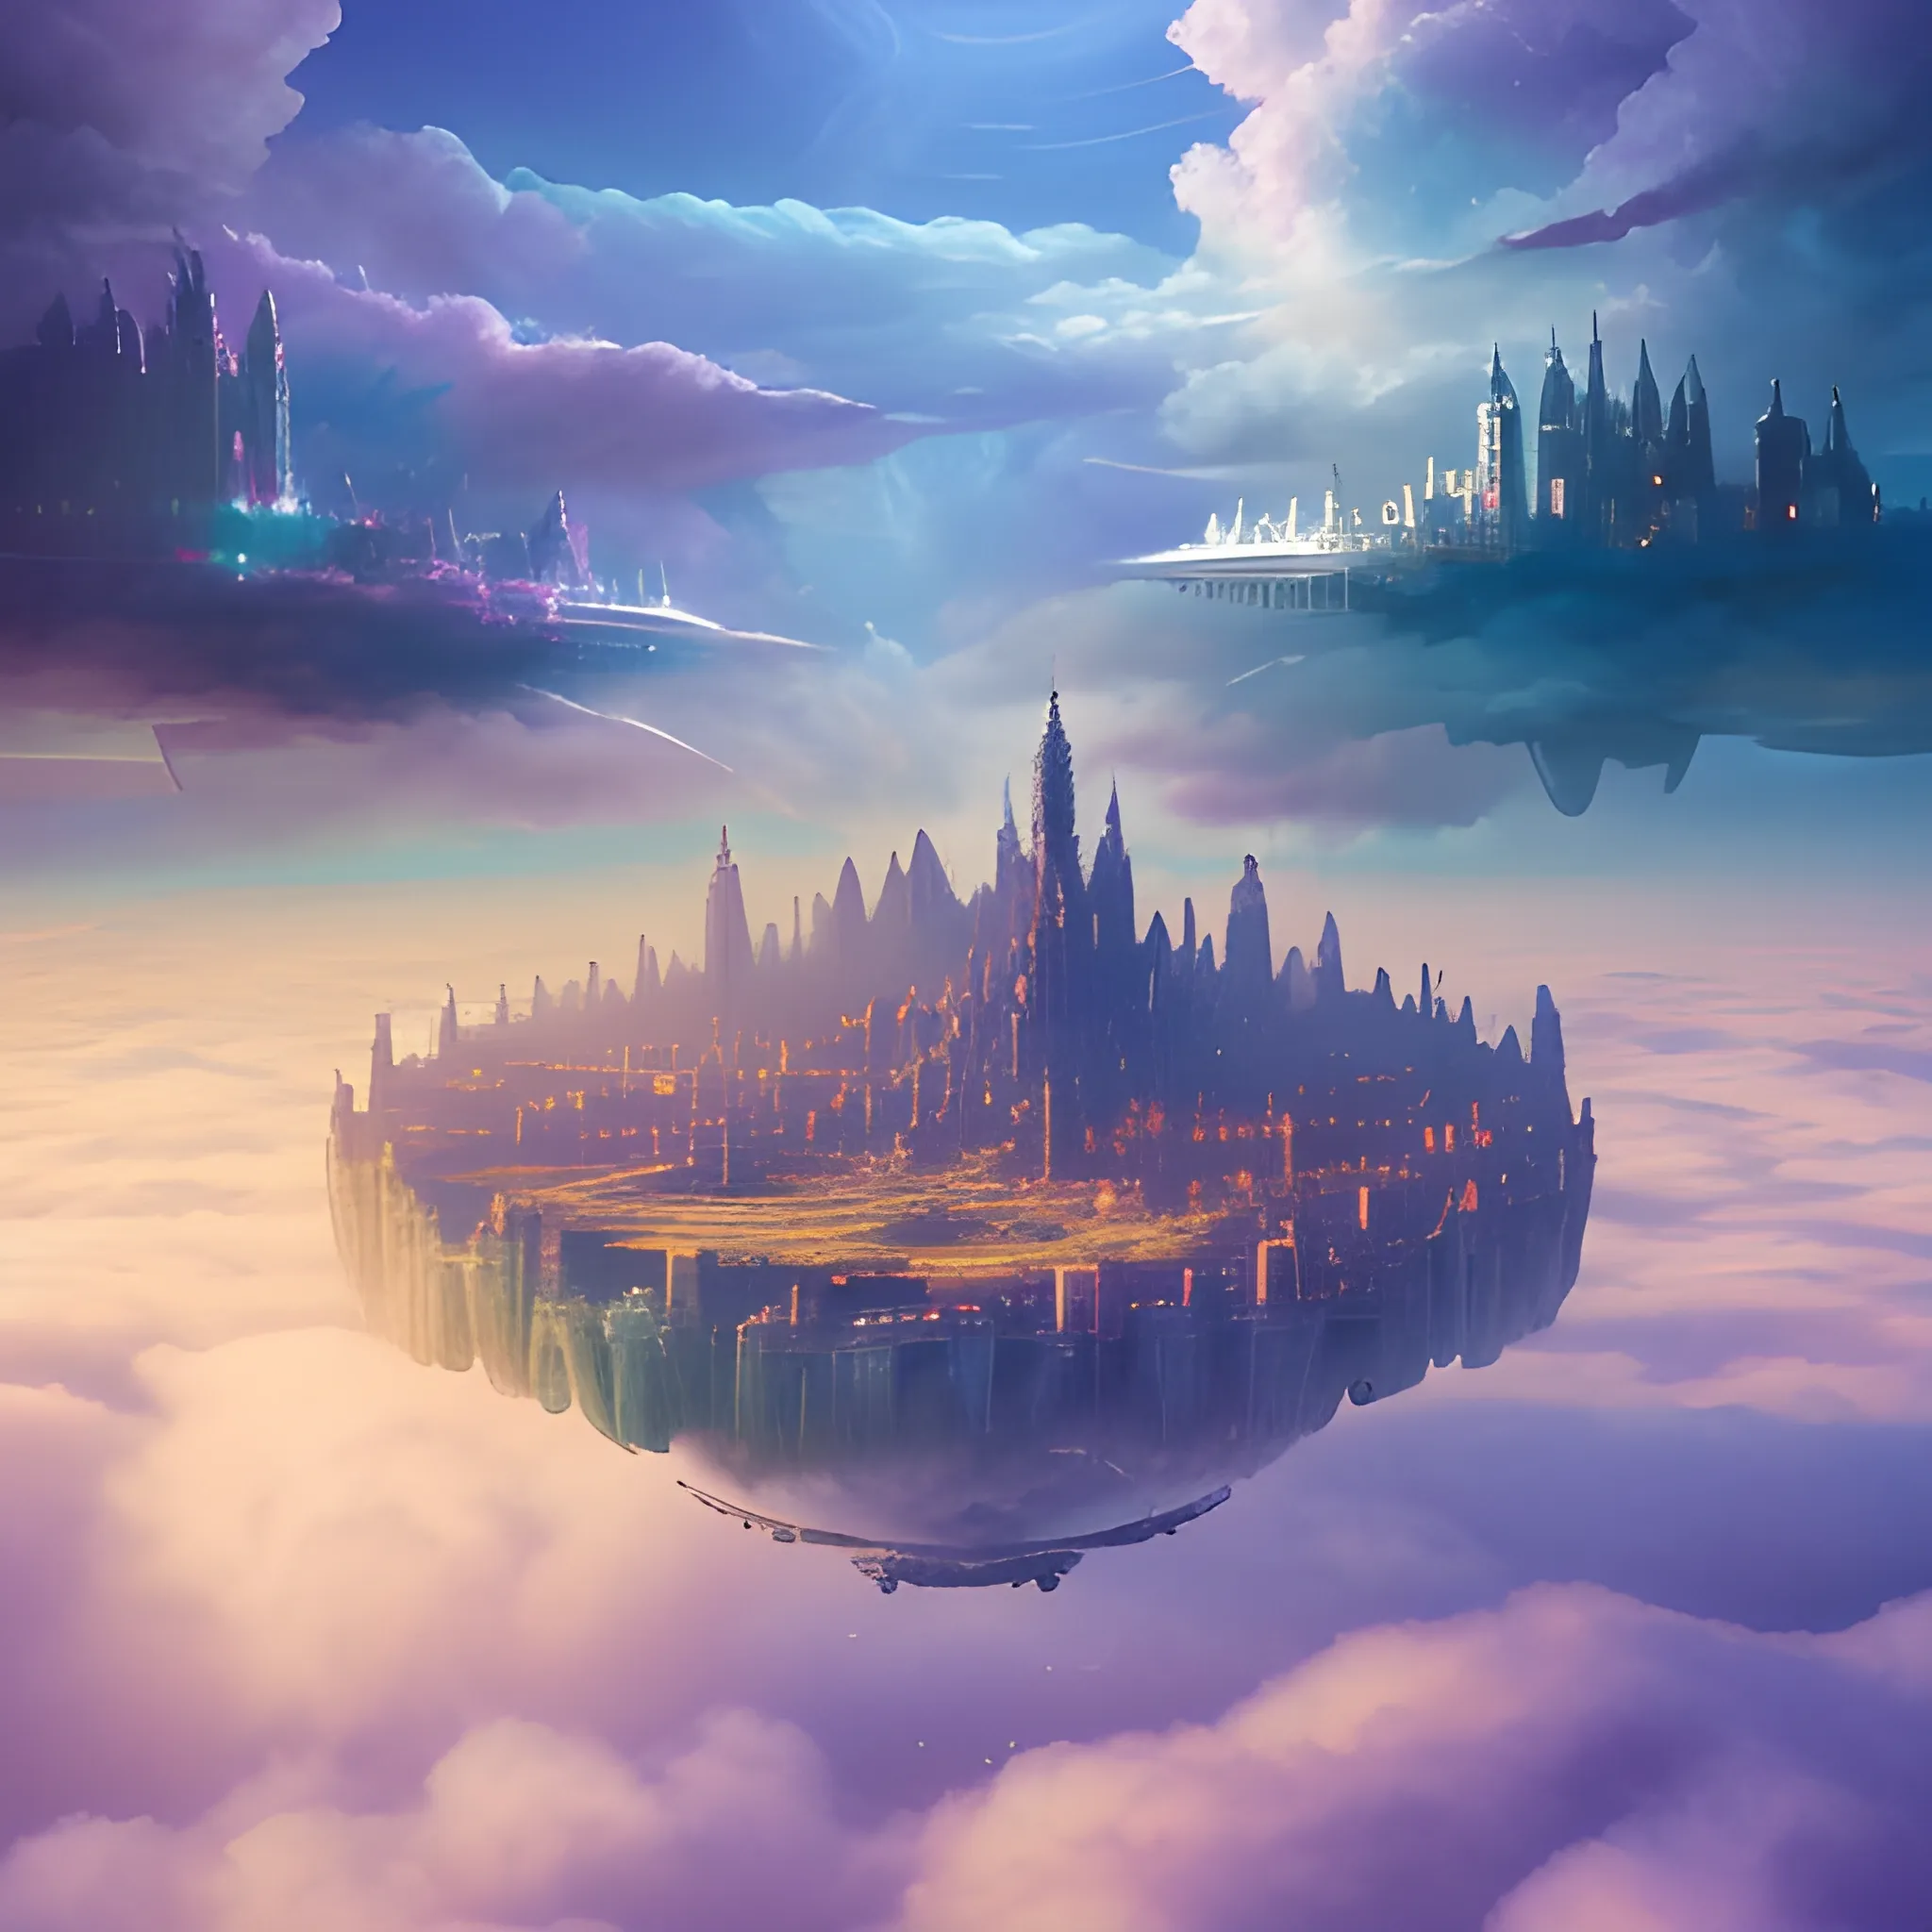 A fantasy city on the clouds.